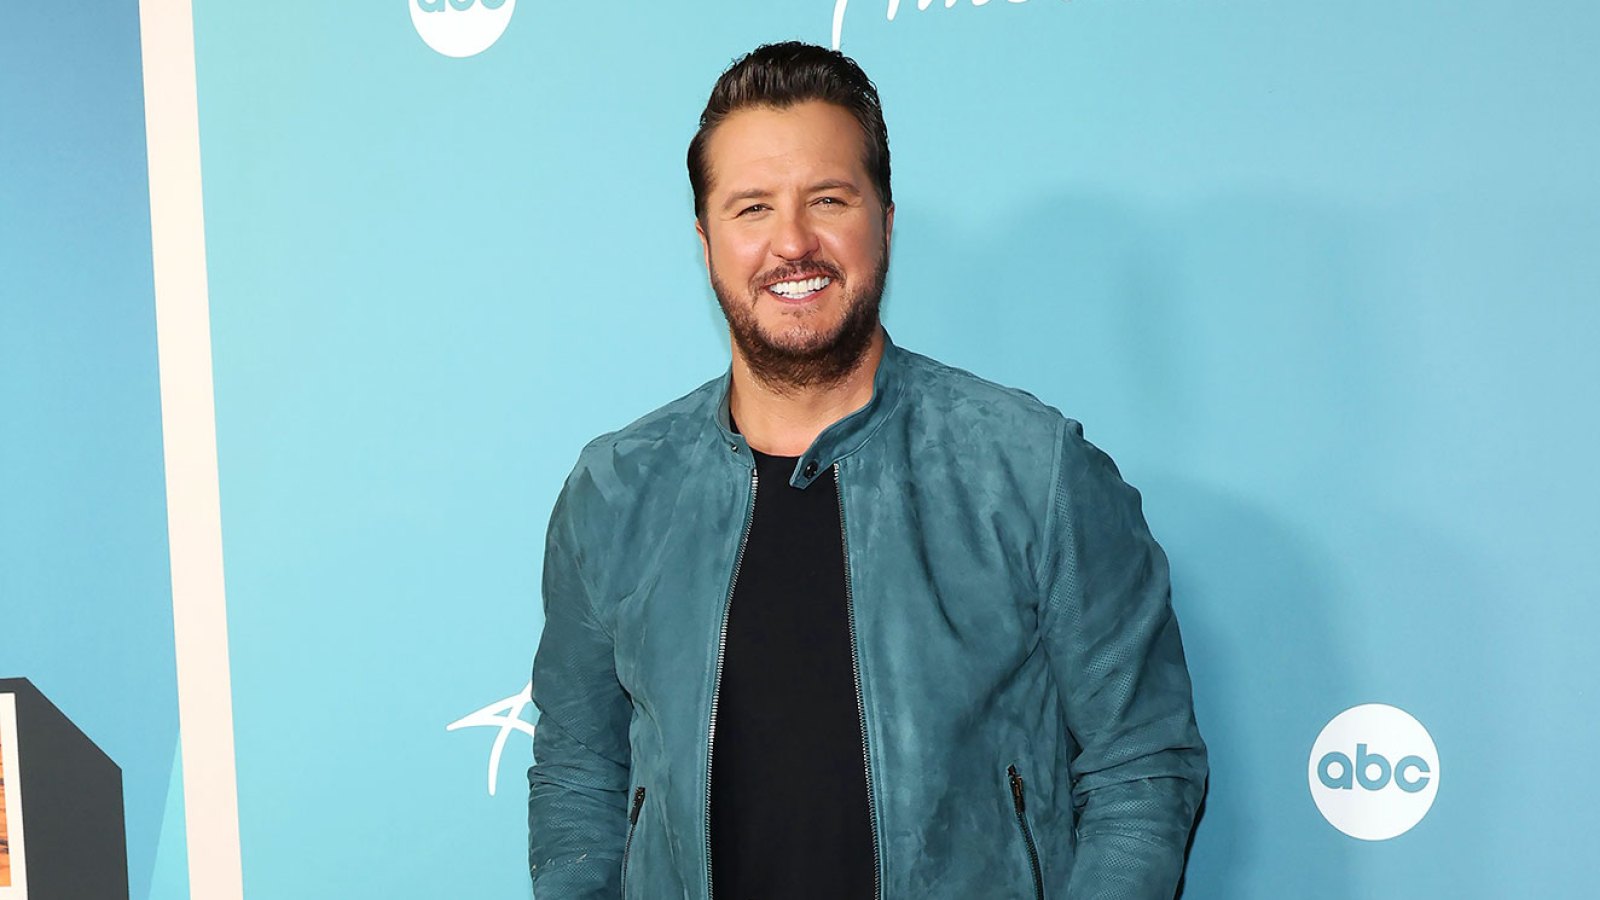 Luke Bryan Jokes He Needs Viral Moments to Promote Music After on Stage Fall